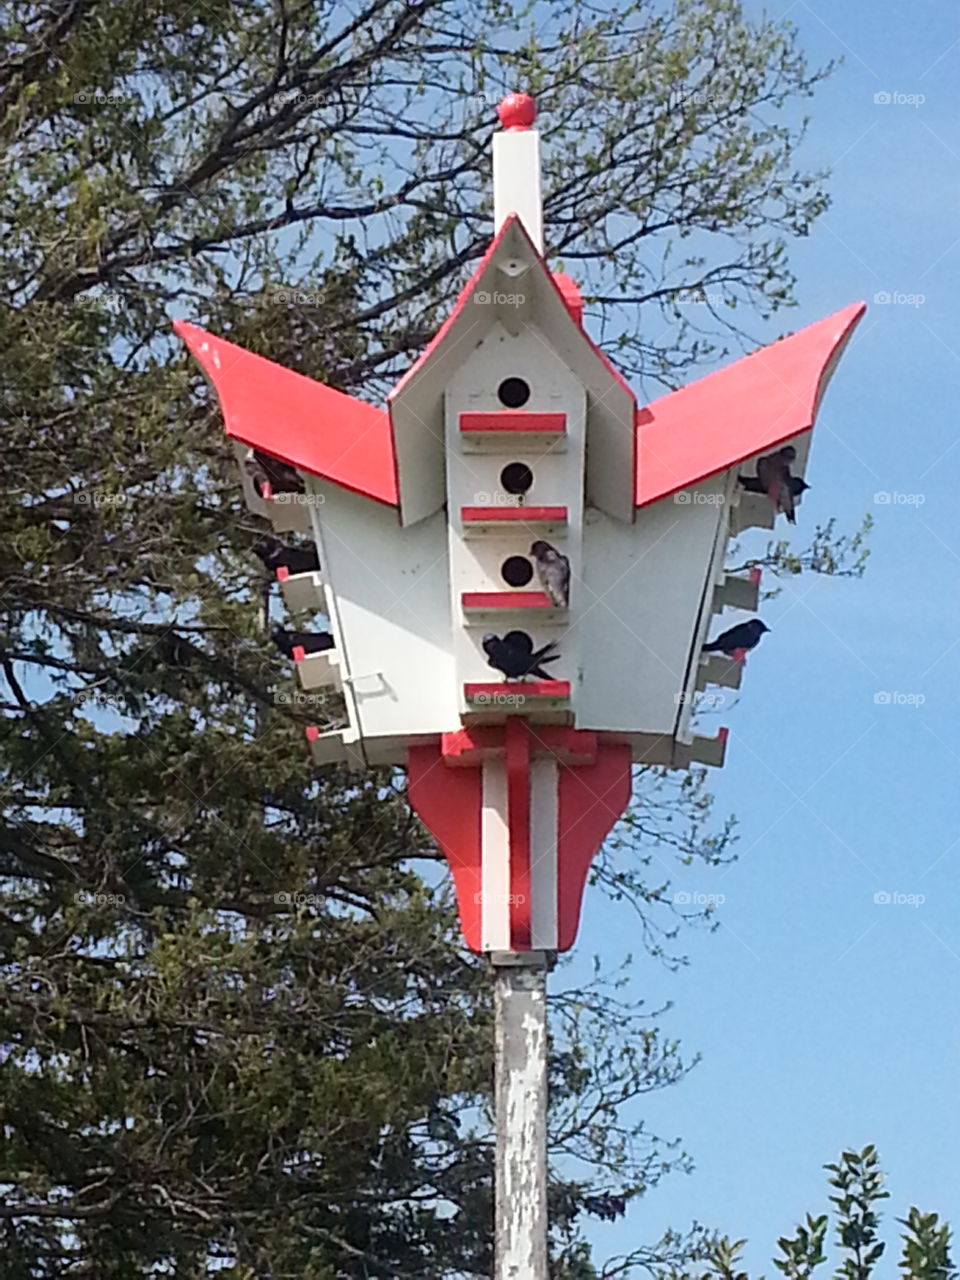 Bird House_002. The chirping of the birds attracted me to this bird house while at Winnipeg Beach today.  